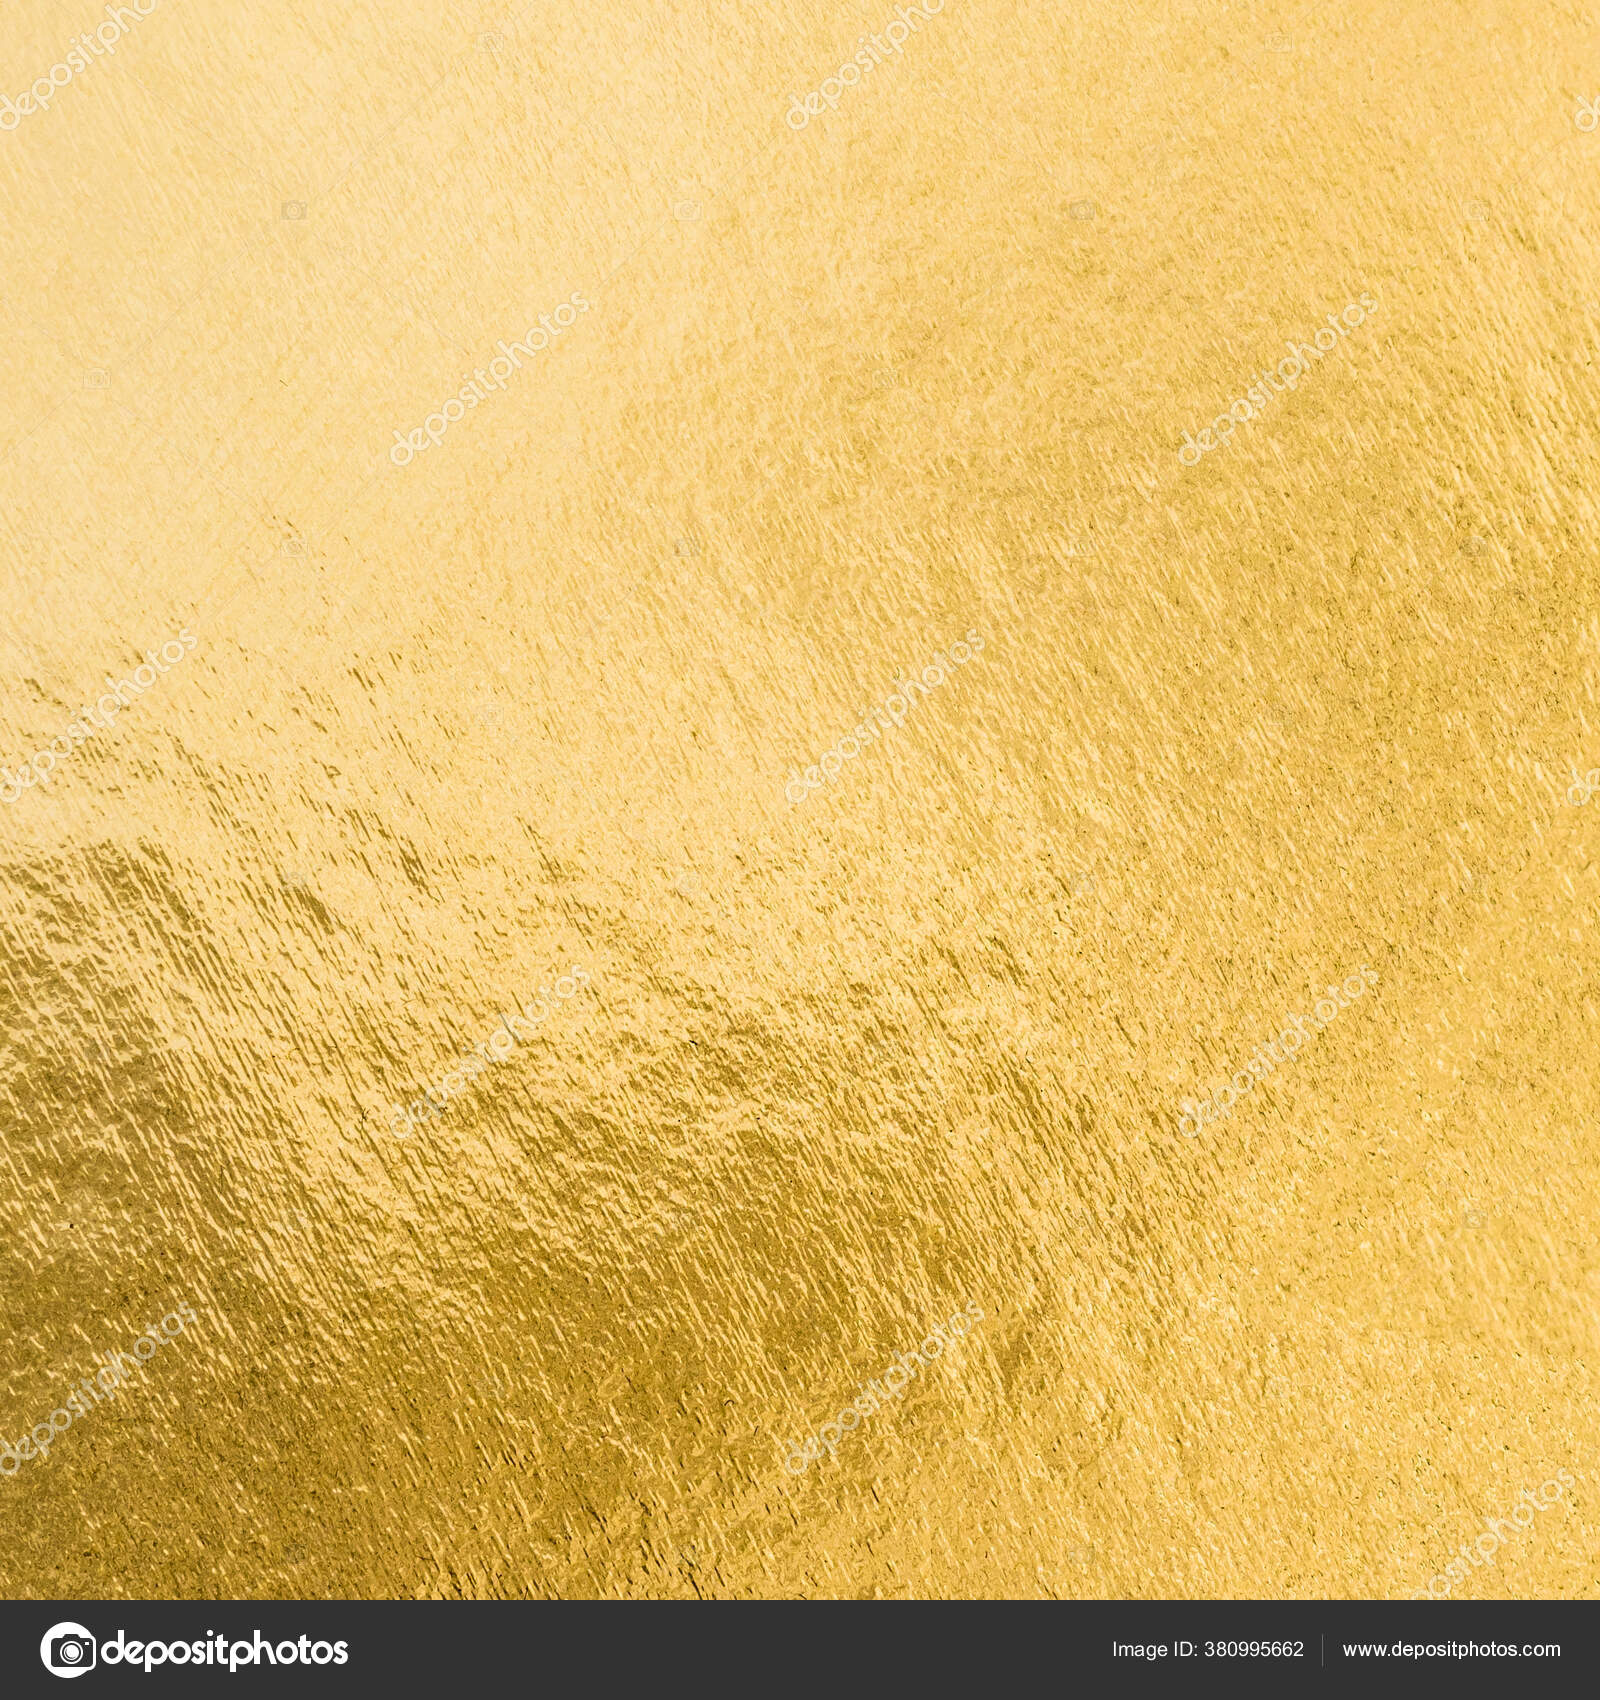 Gold foil leaf metallic wrapping paper shiny texture background